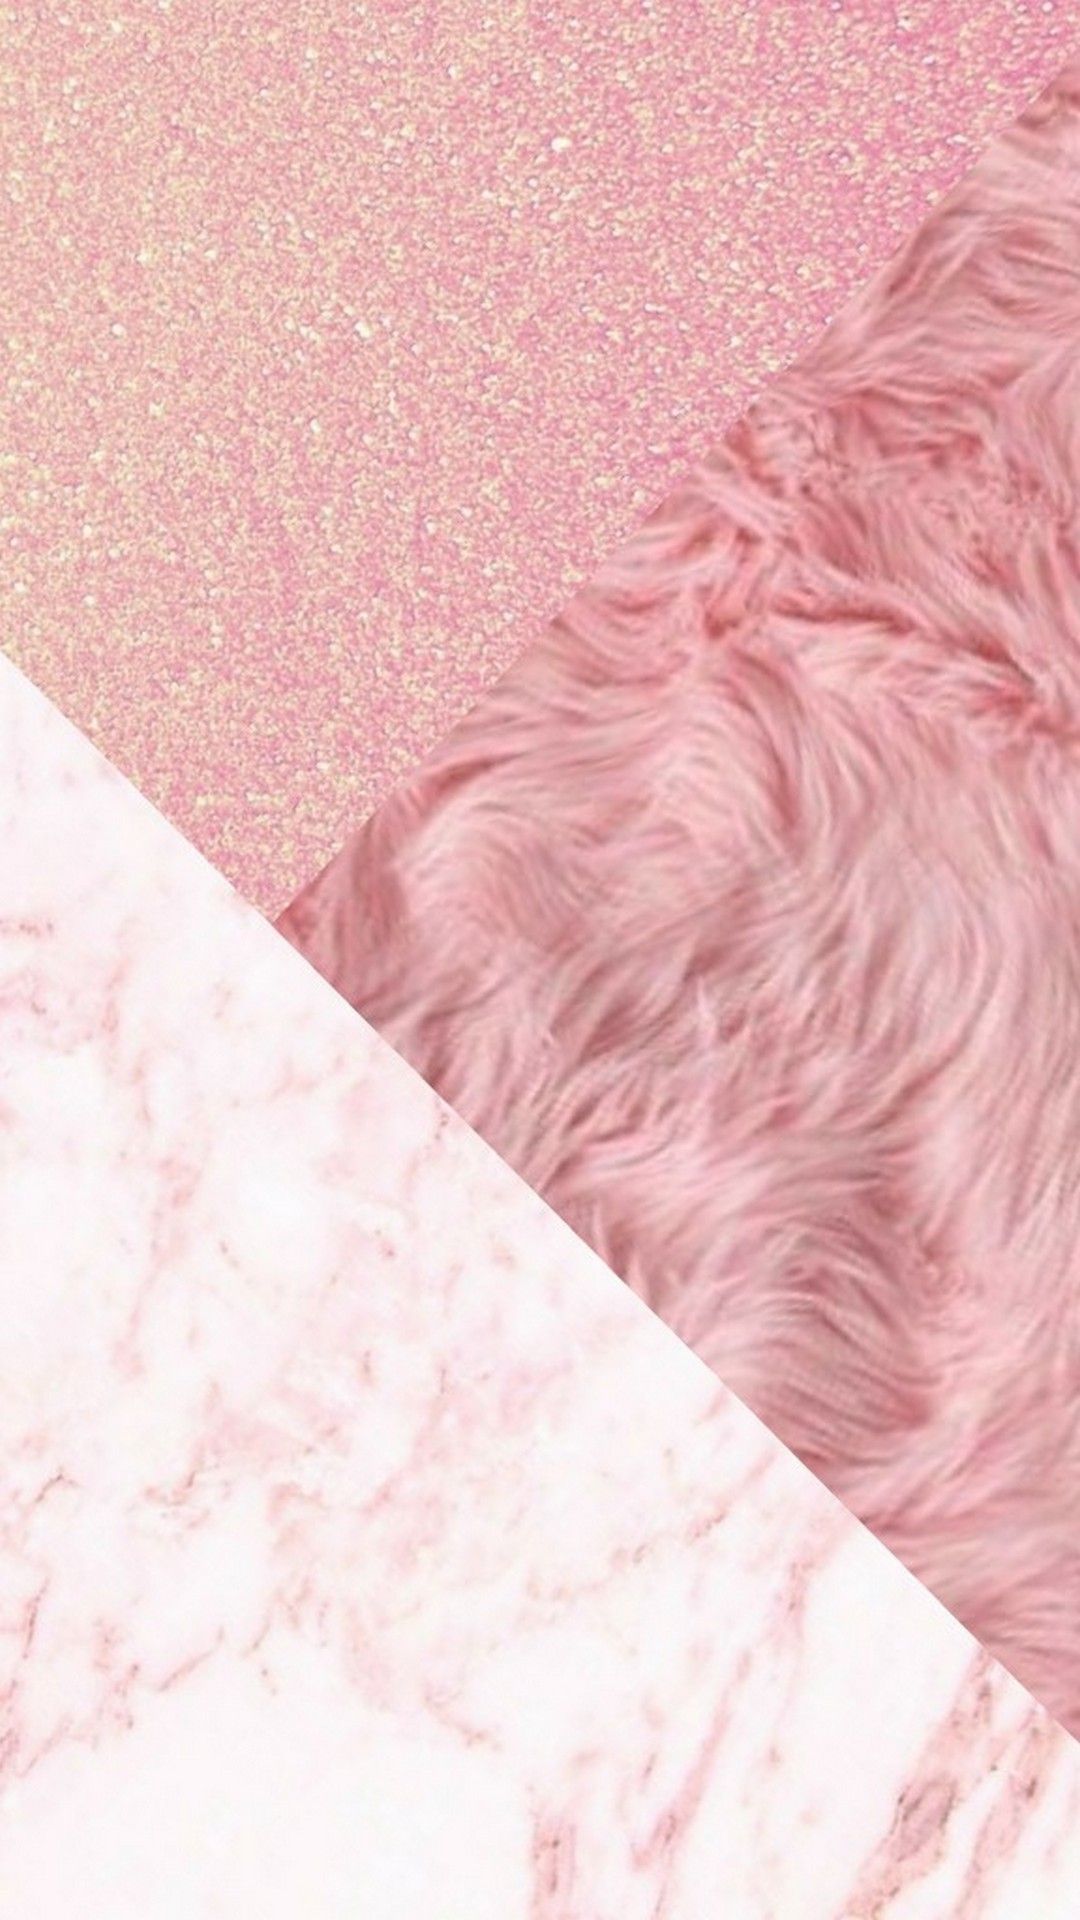 Rose Gold Phone Backgrounds